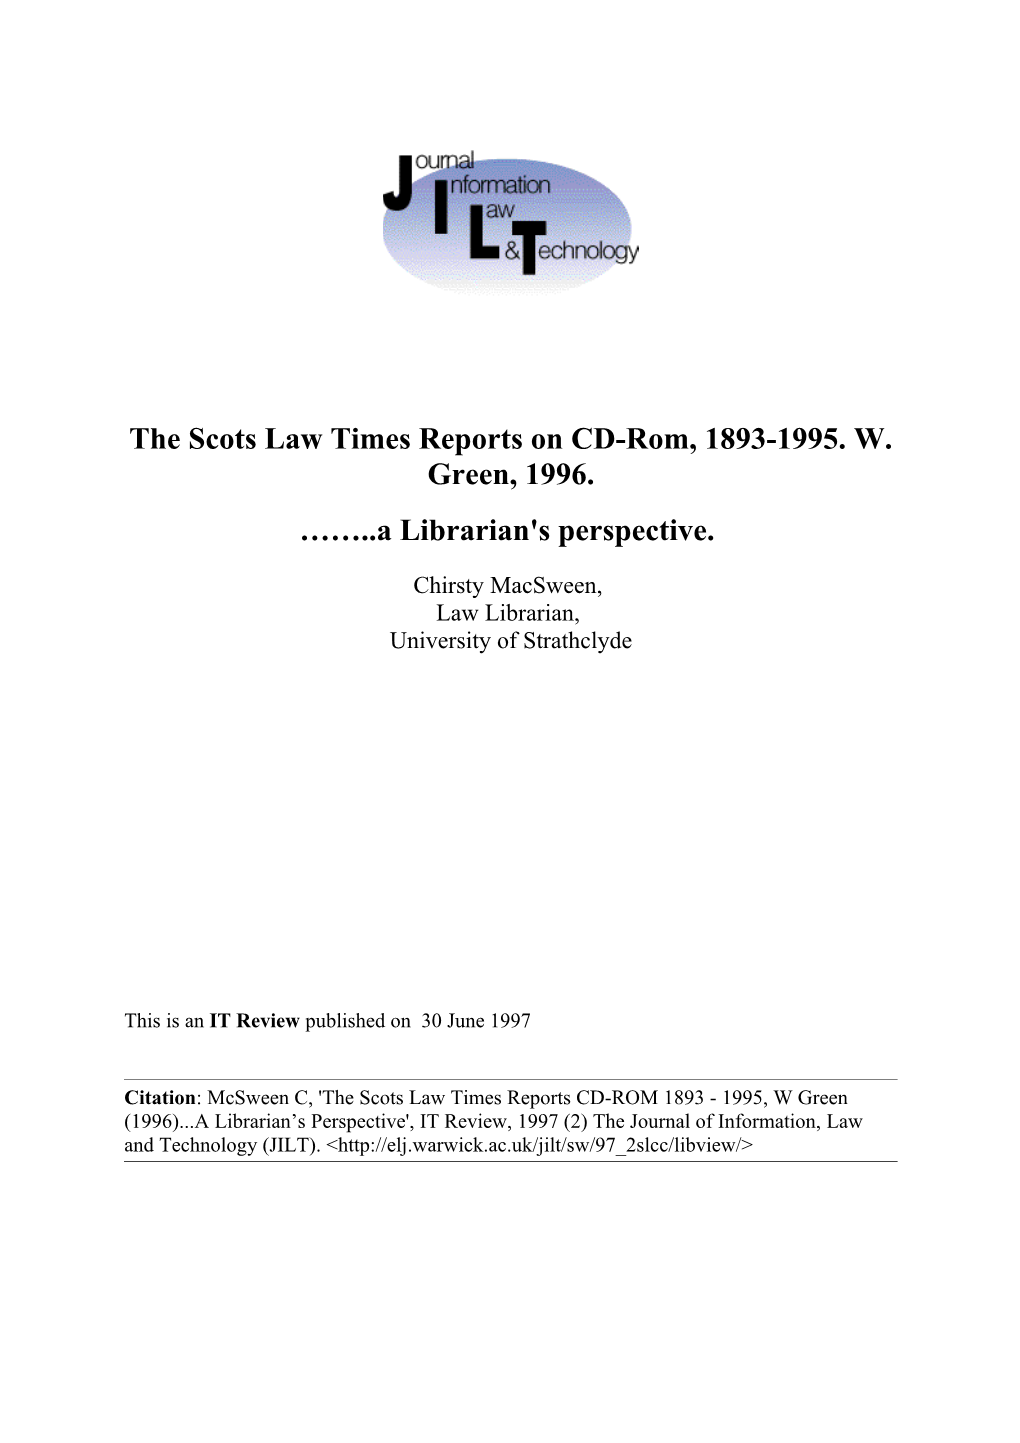 The Scots Law Times Reports on CD-Rom, 1893-1995. W. Green, 1996